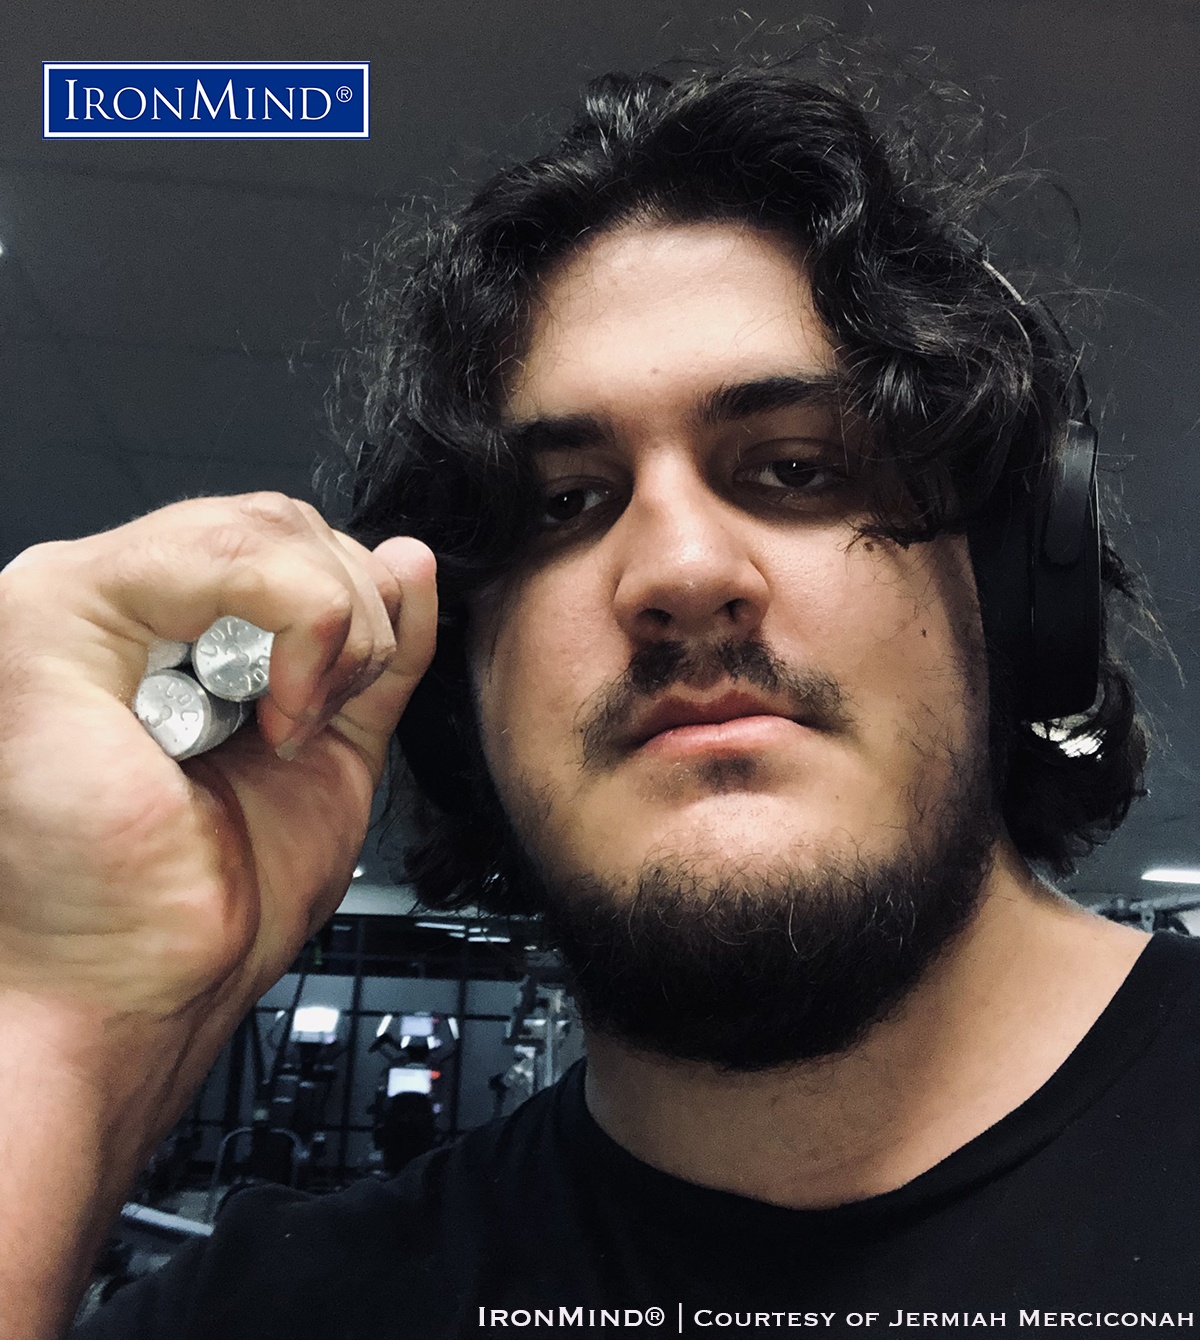 Keep your eye on 6’ 6” tall, 320 lb. Jermiah Marciconah as with two years of on-and-off gripper training, the 23-year old Australian has certified on the Captains of Crush No. 3 gripper. IronMind® | Image courtesy of Jermiah Merciconah